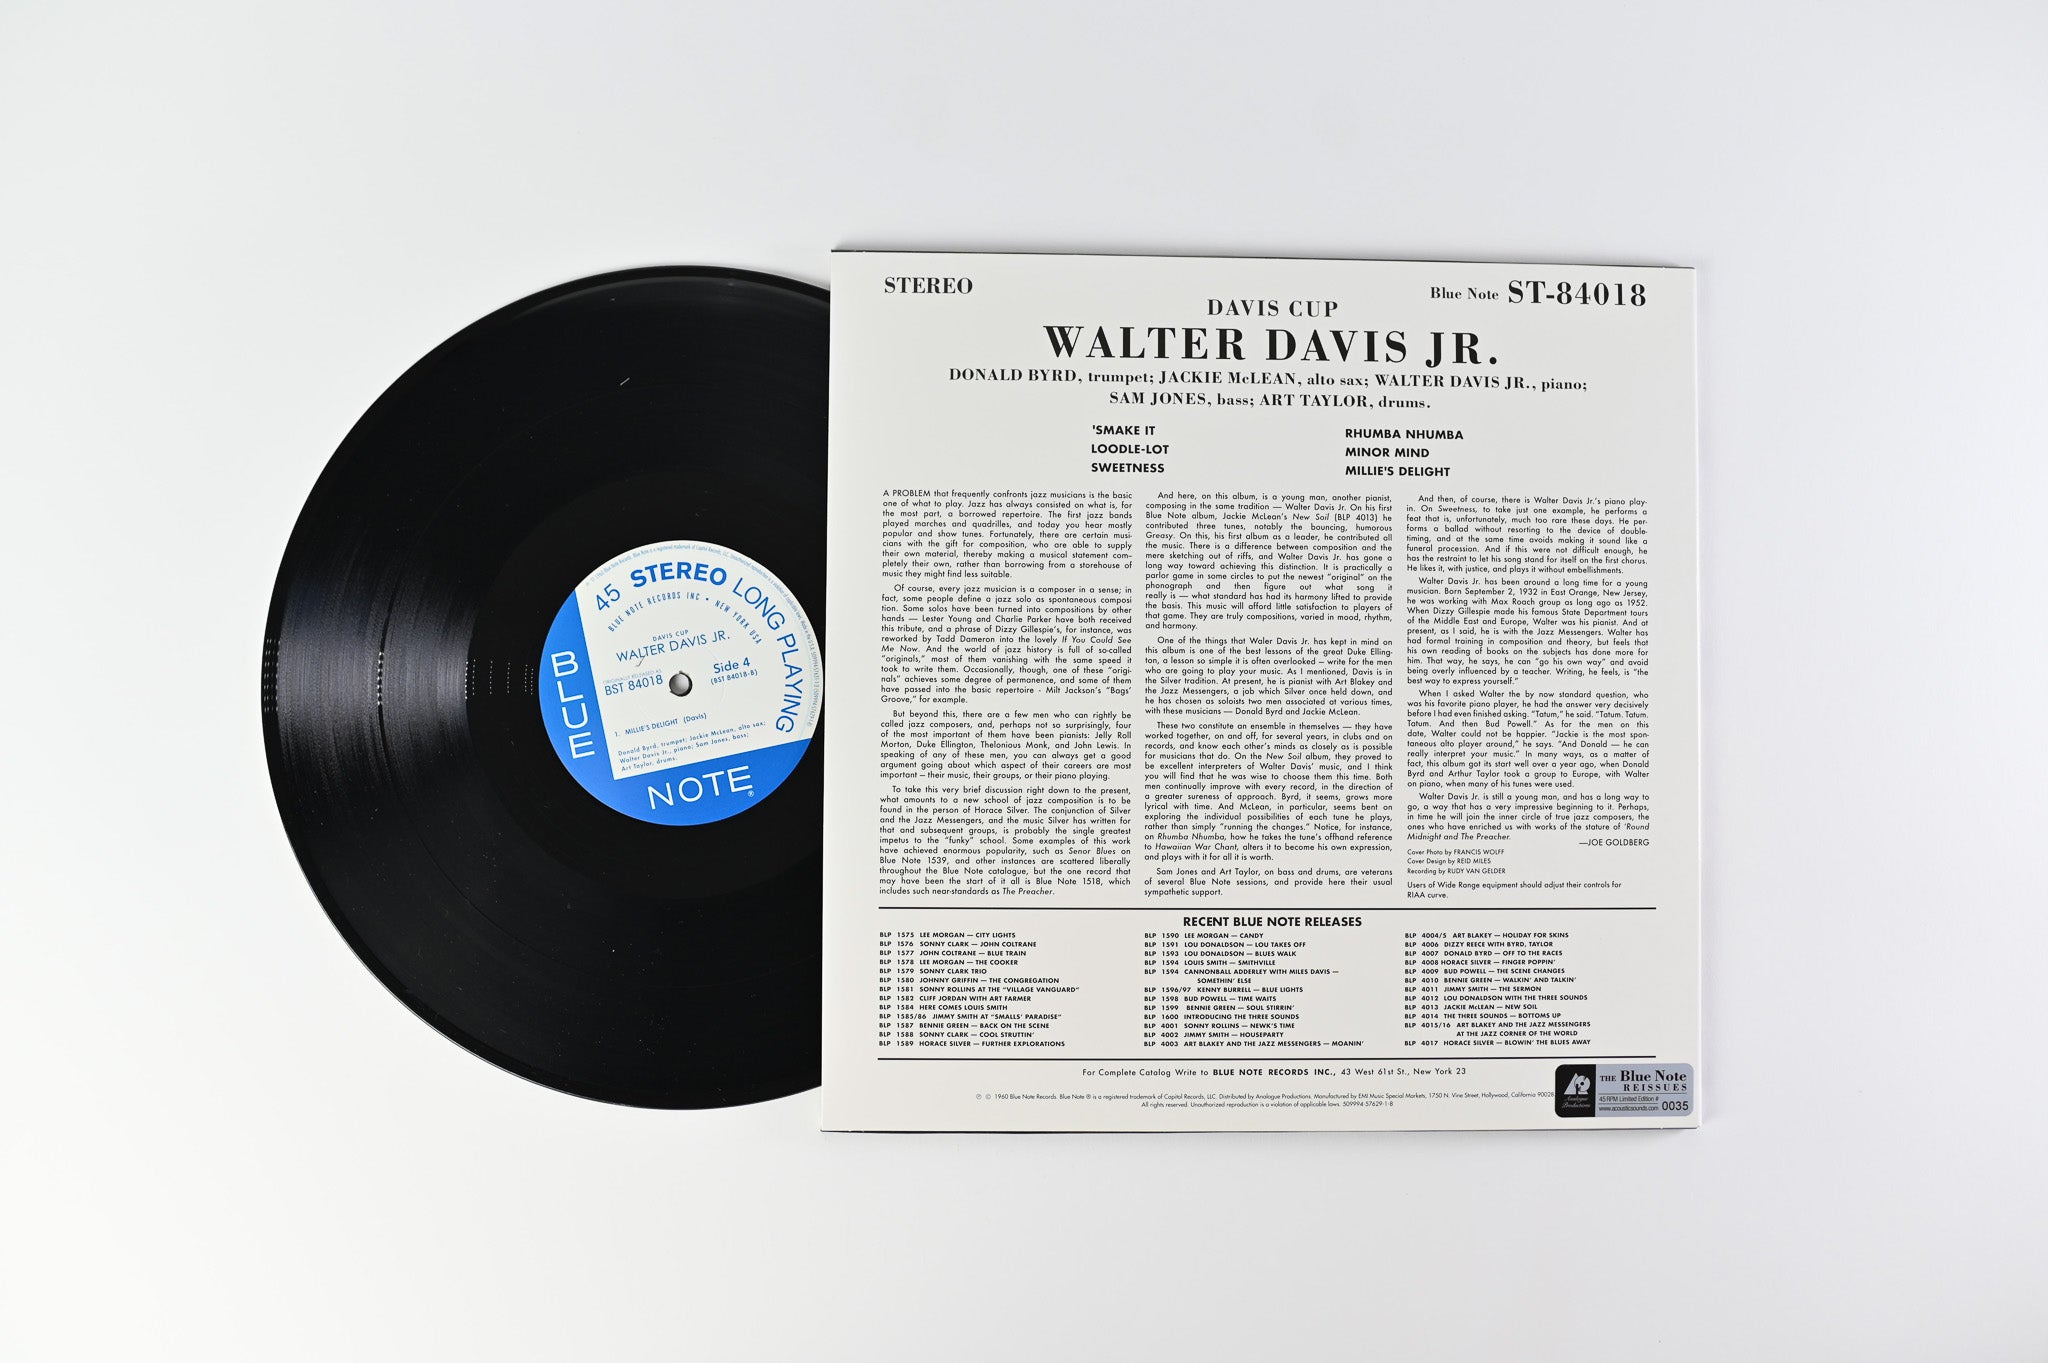 Walter Davis Jr. - Davis Cup on Blue Note Analogue Productions Ltd 45 RPM Numbered Reissue